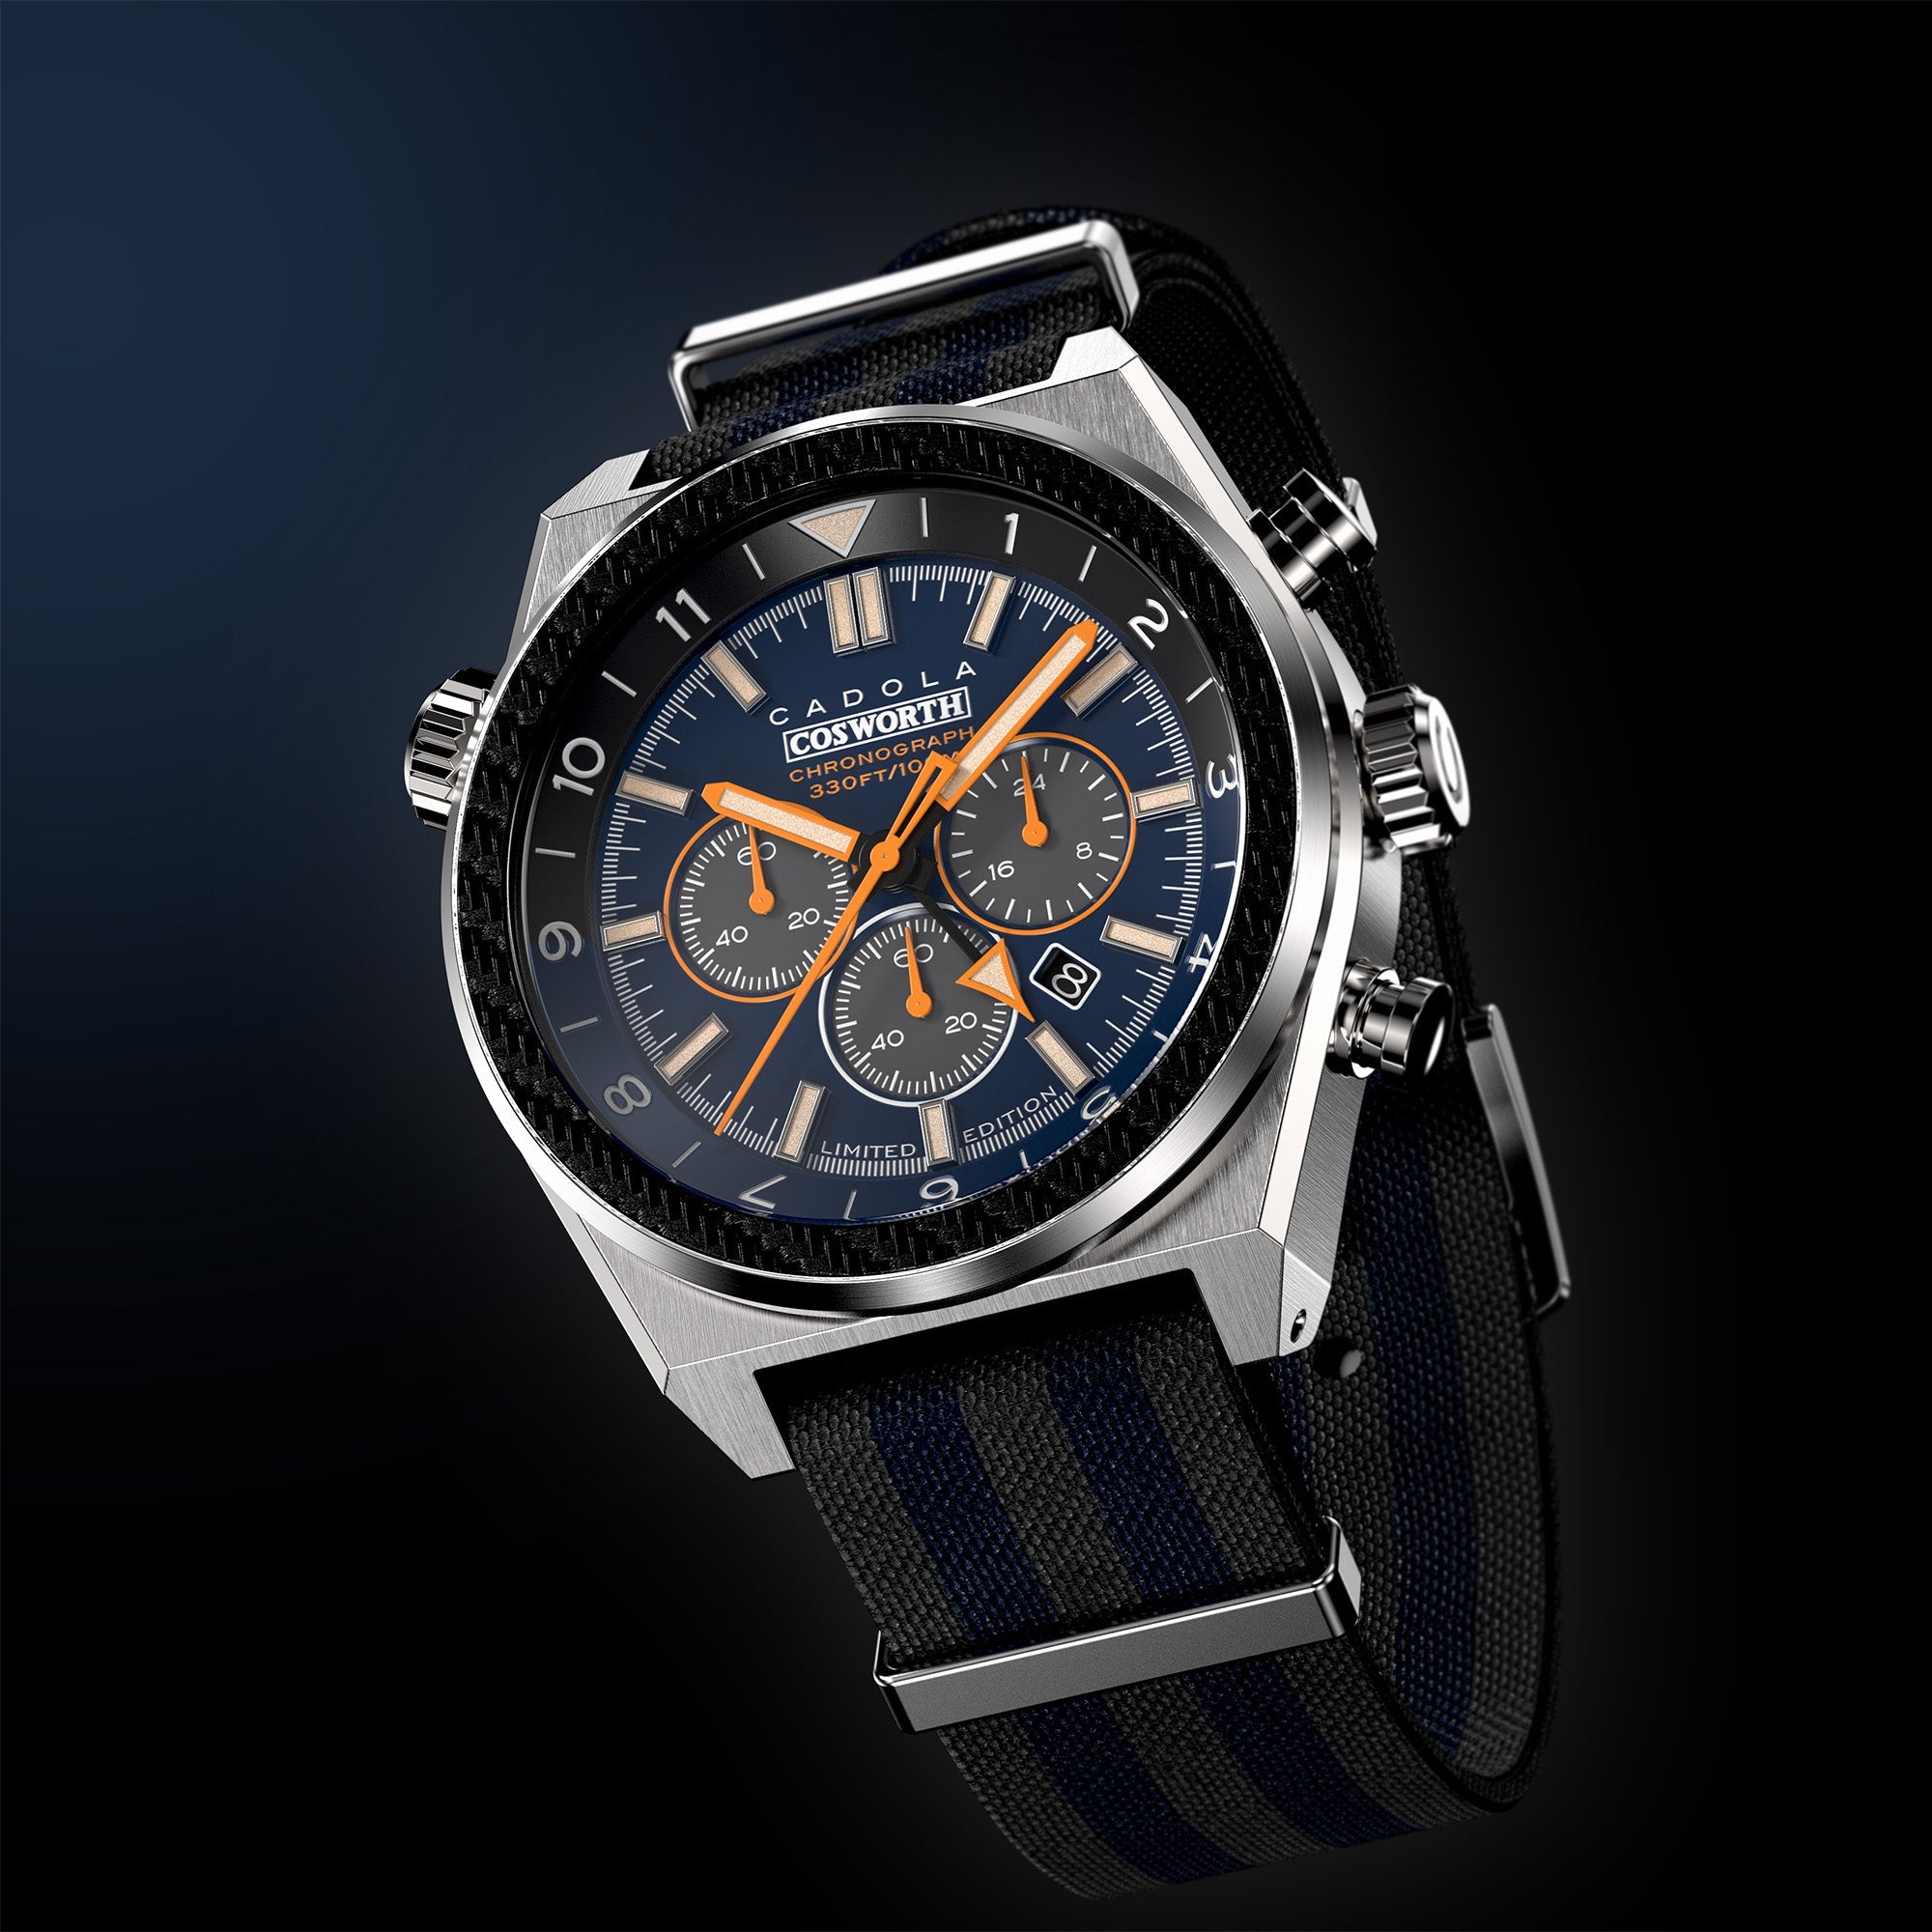 CADOLA Cadola Men's Ivy Blue Cosworth Costin Dual Time Chronograph Limited Edition Watch CD-1042-11